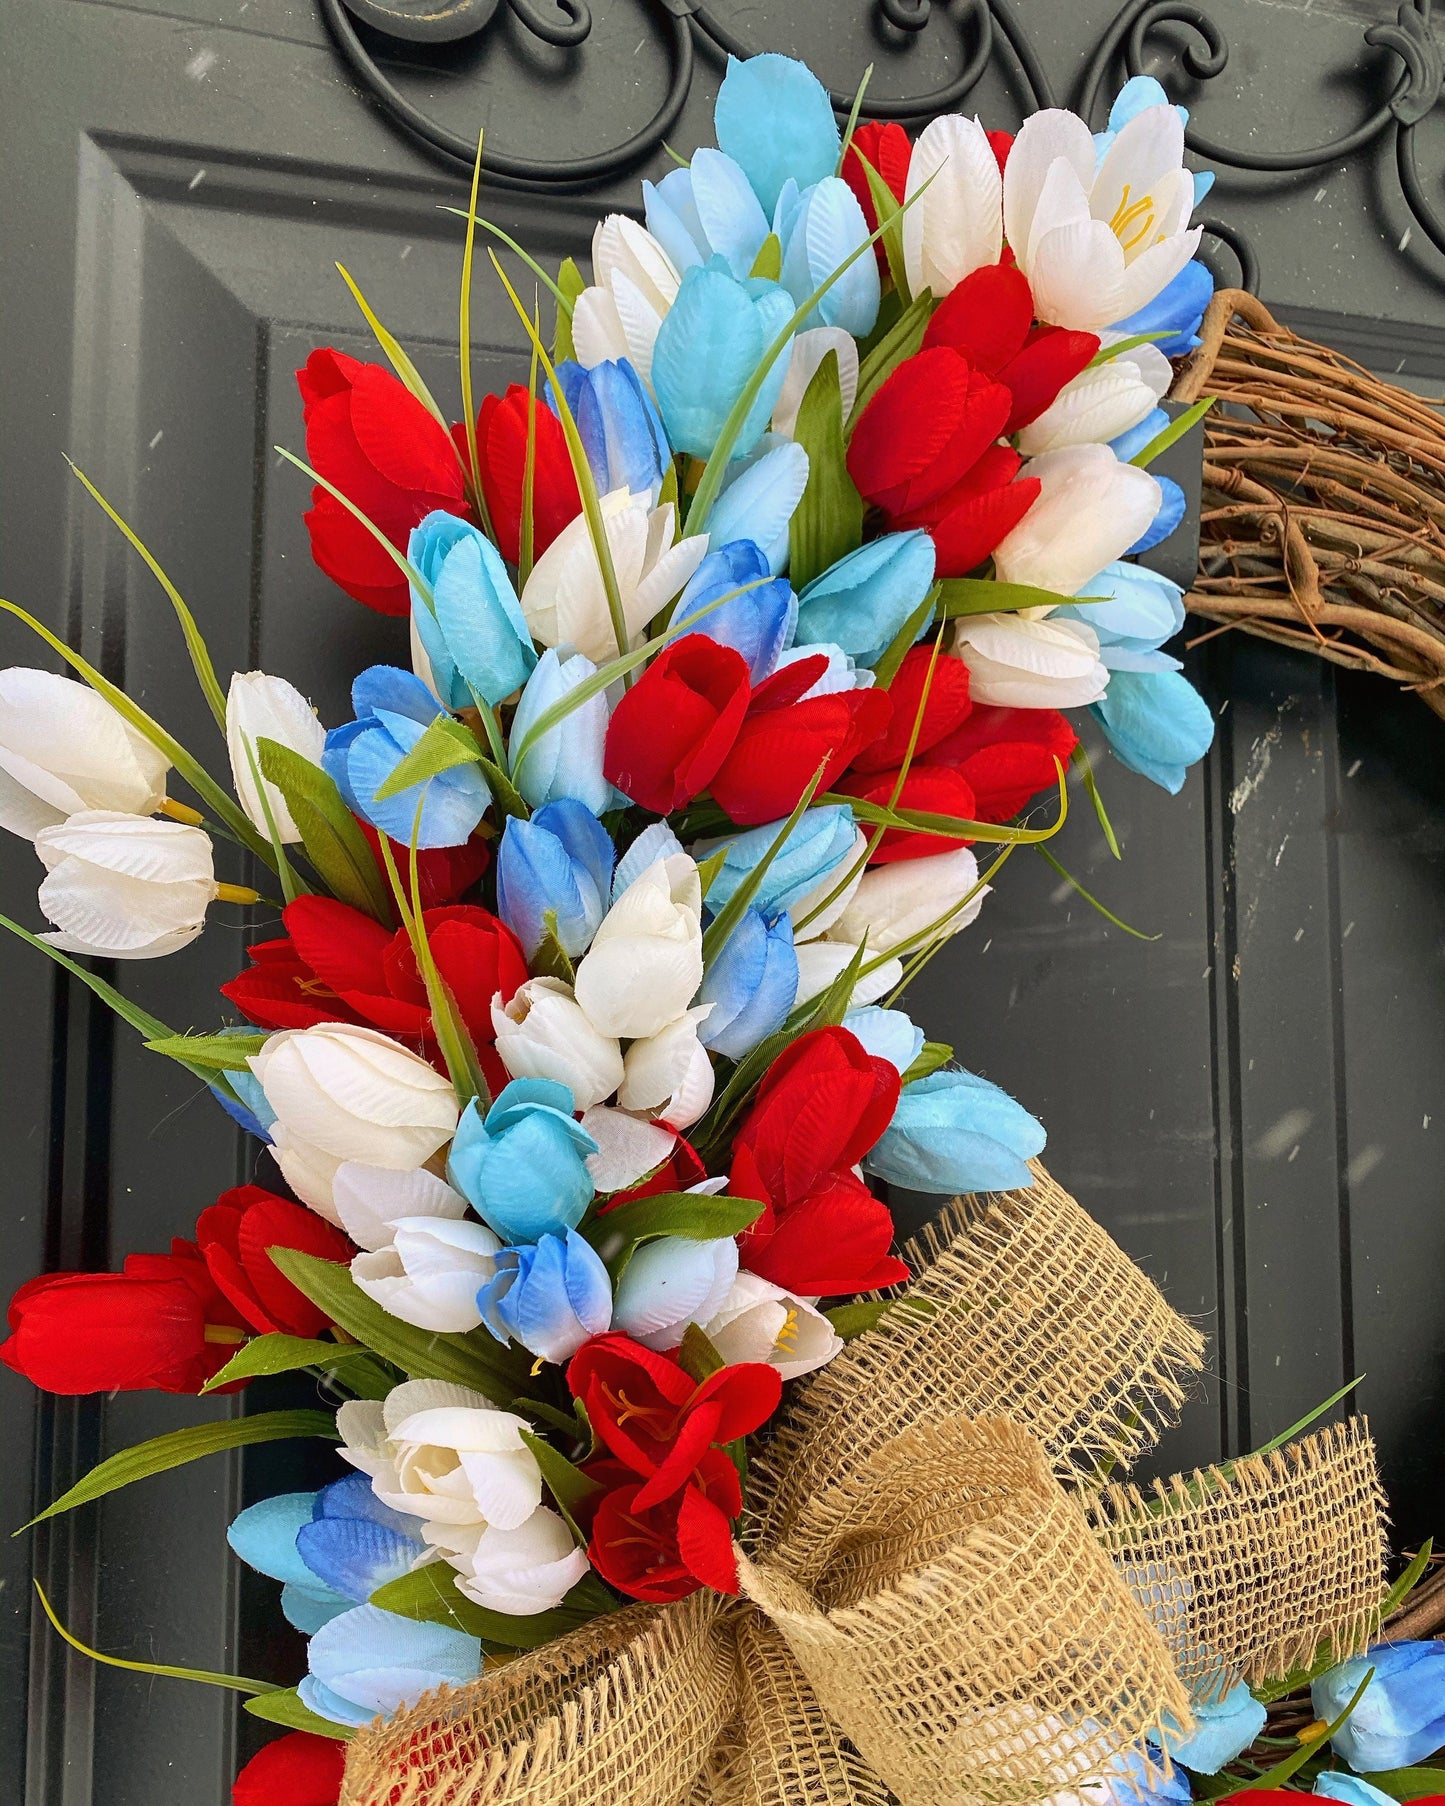 Patriotic Independence Day Wreath With Cross,Tulip Wreath, 4th of July Wreath, American Flag Wreaths, Patriotic Home Decor, Military Wreath, Housewarming Gift Ideas, America Wreath, USA